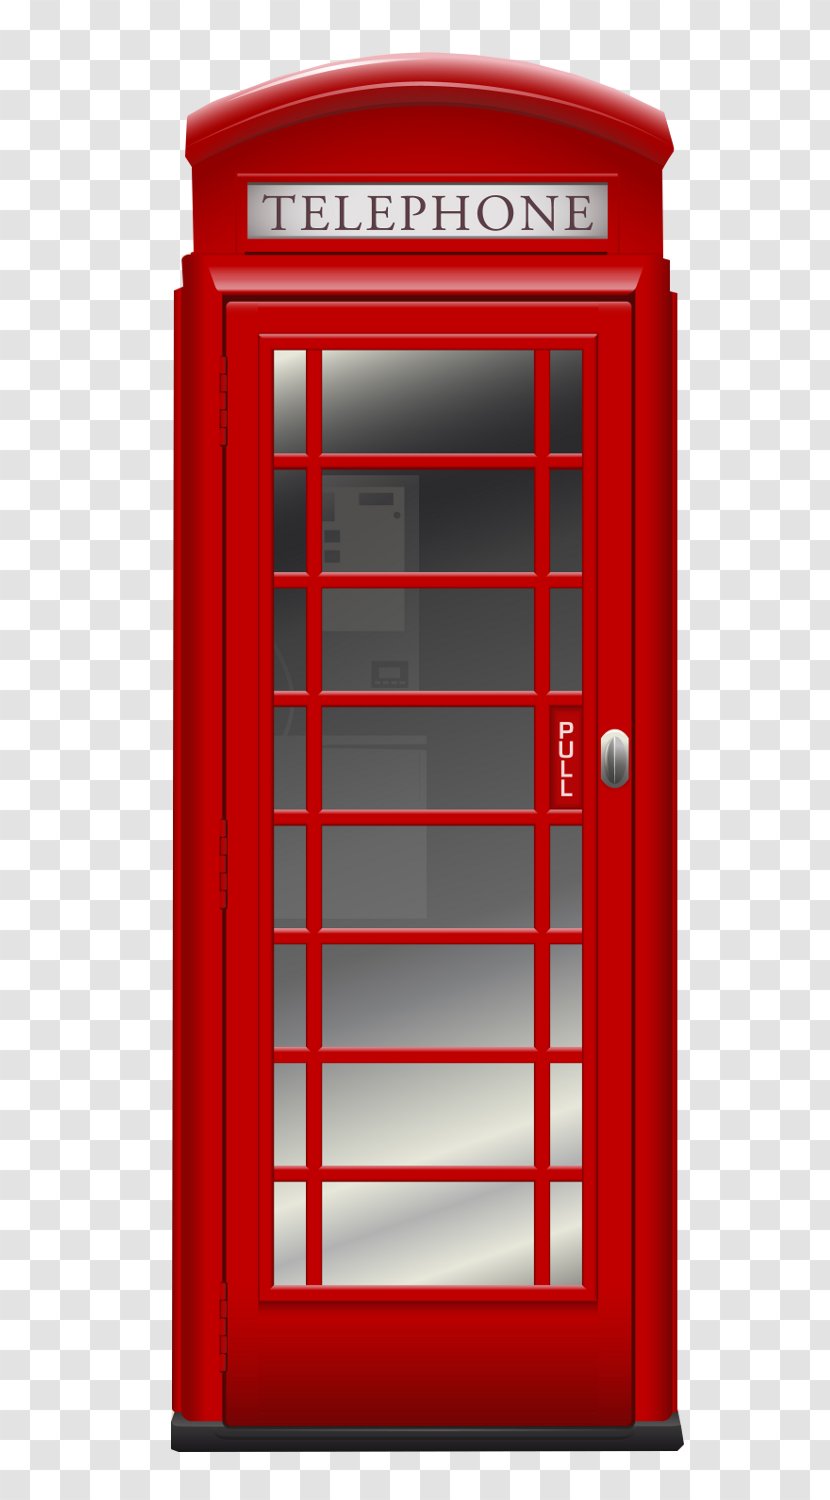 London IPhone Telephone Booth Red Box Transparent PNG